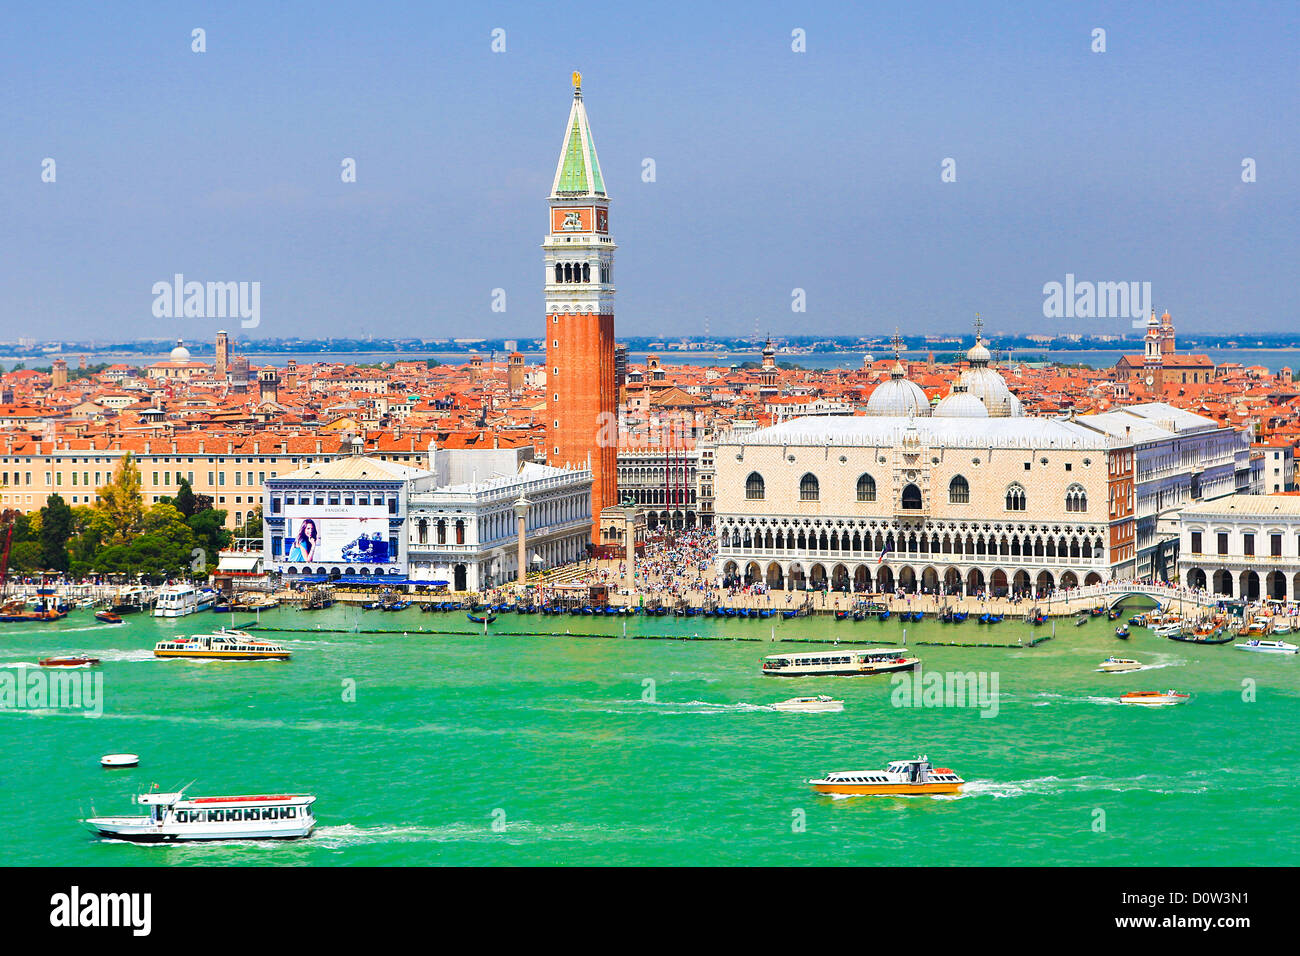 Italy, Europe, travel, Venice, Campanile, Belfry, Palace, ducale, Canal Grande, palace, san Marco, skyline, square, tourism, Une Stock Photo